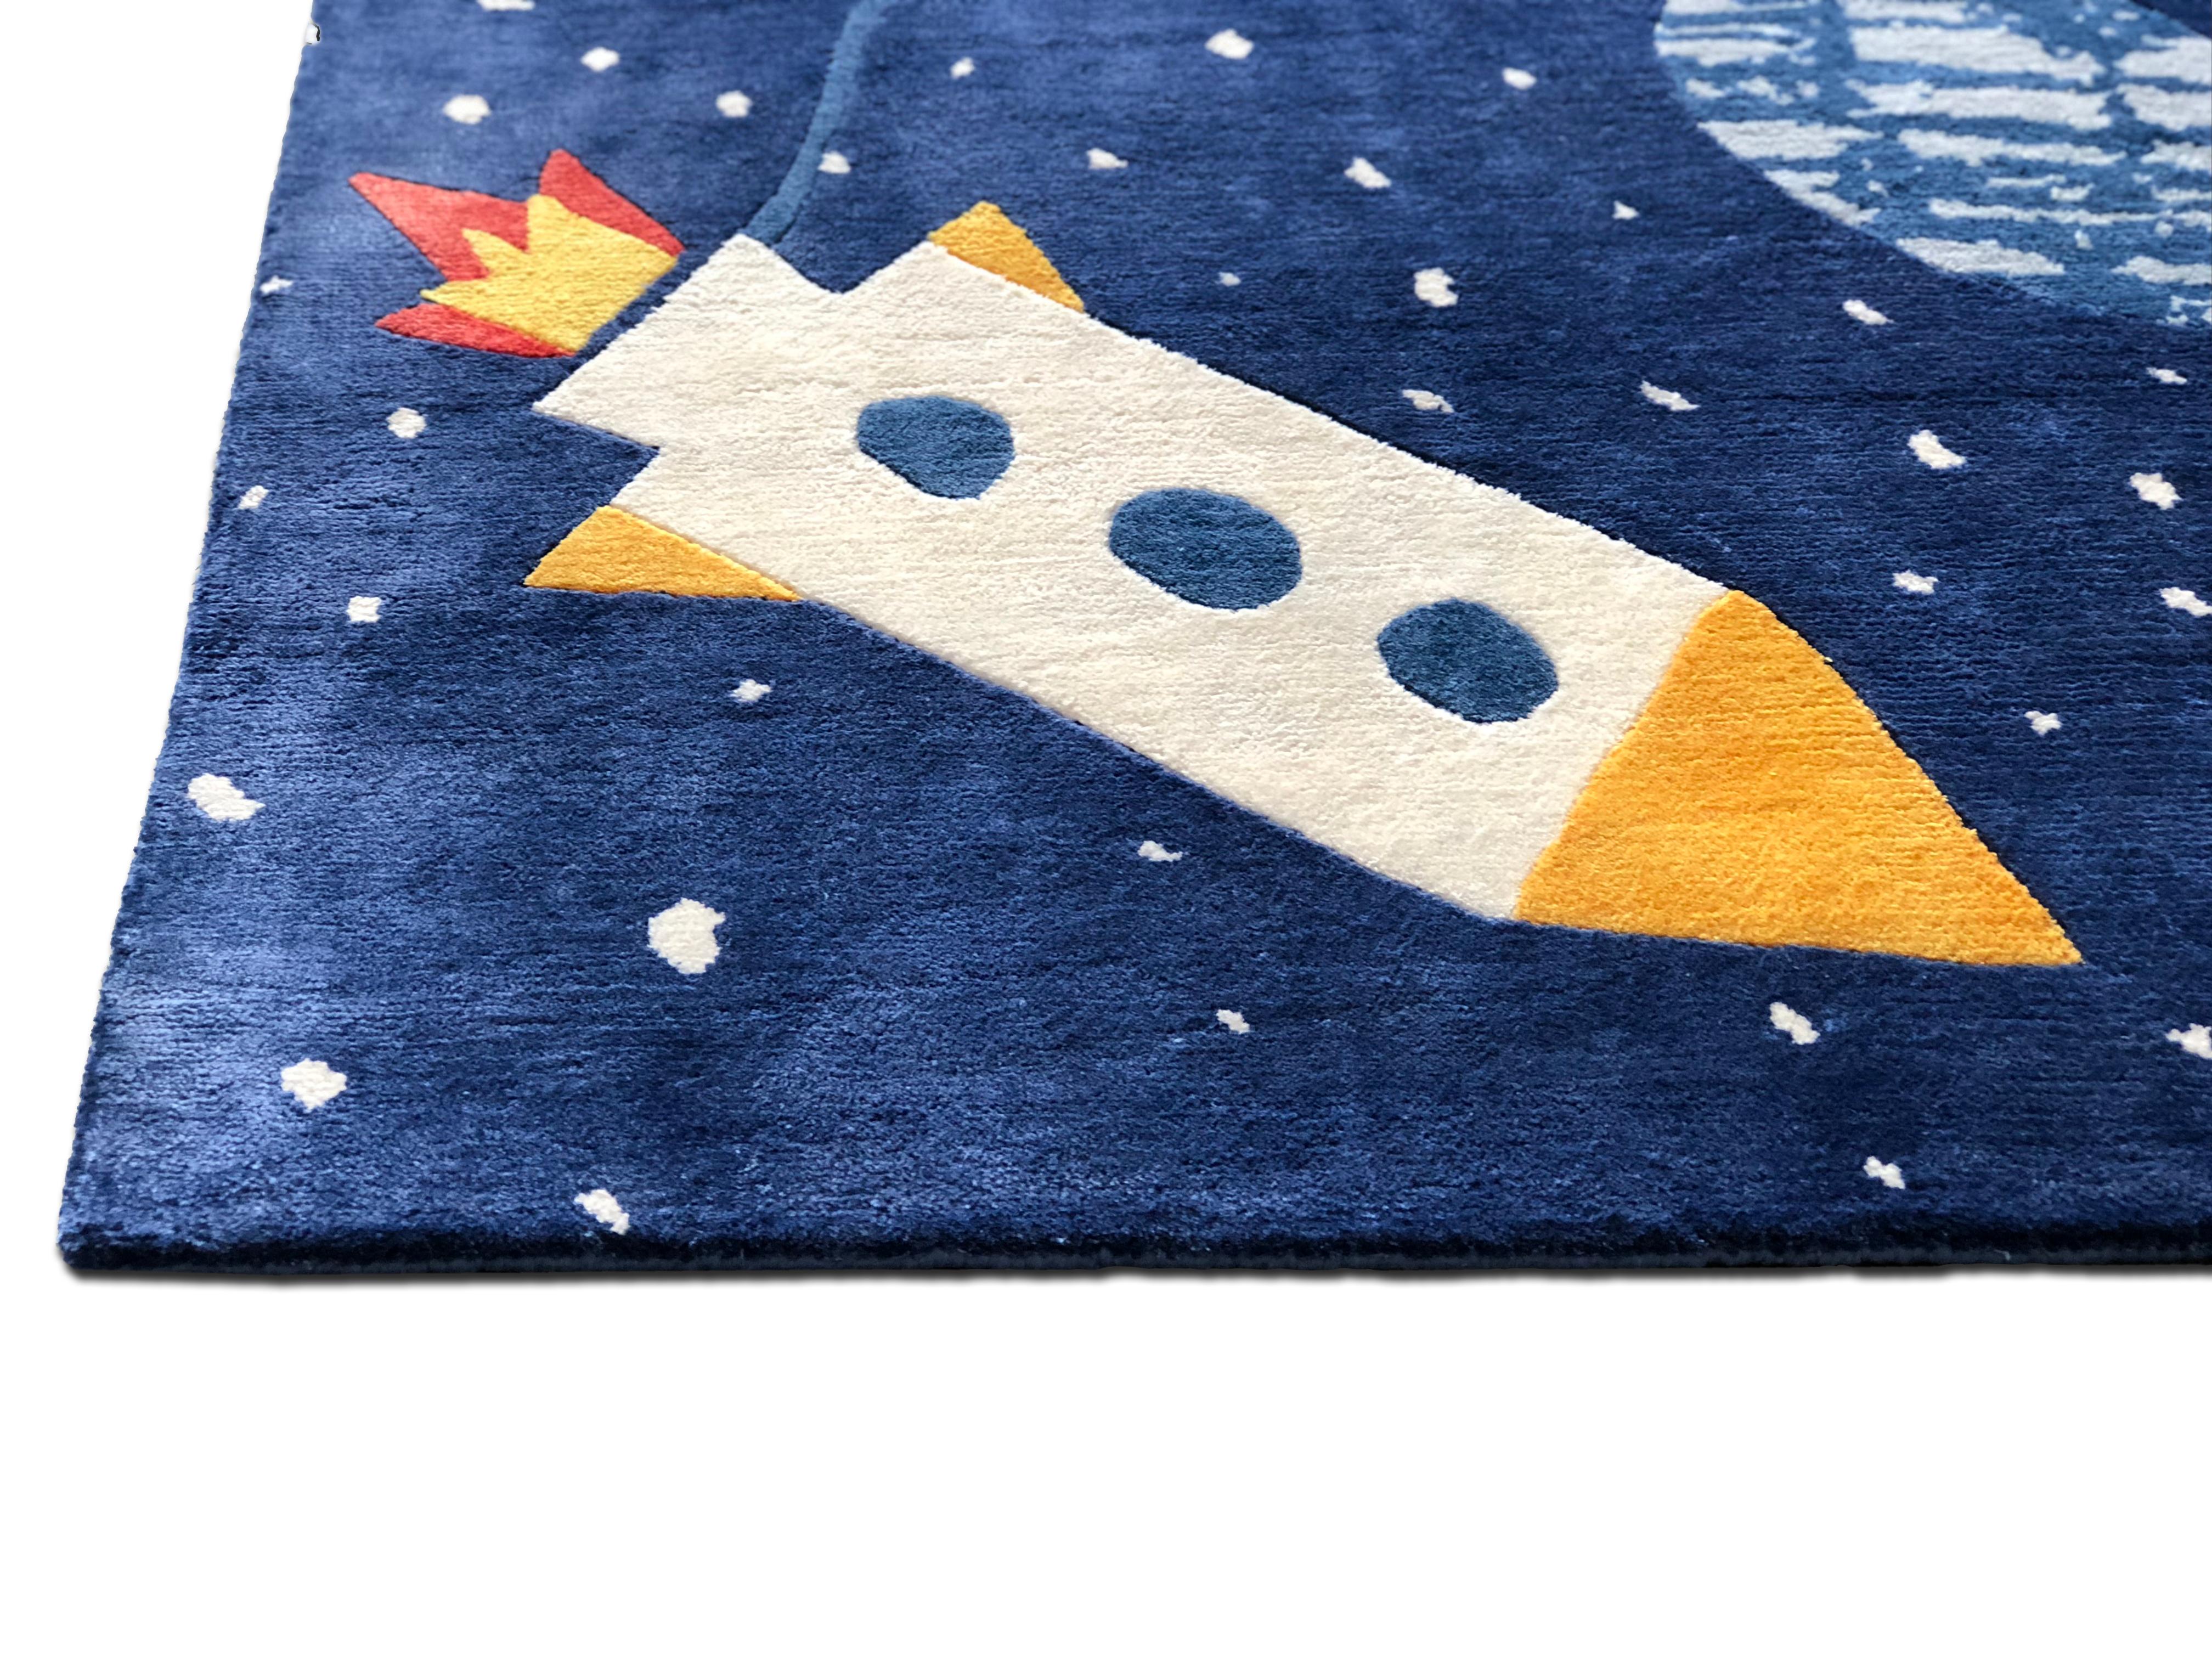 Hand-Knotted Space Ace Rug by Daria Solak, Hand Knotted, 100% New Zealand Wool 200x250cm For Sale